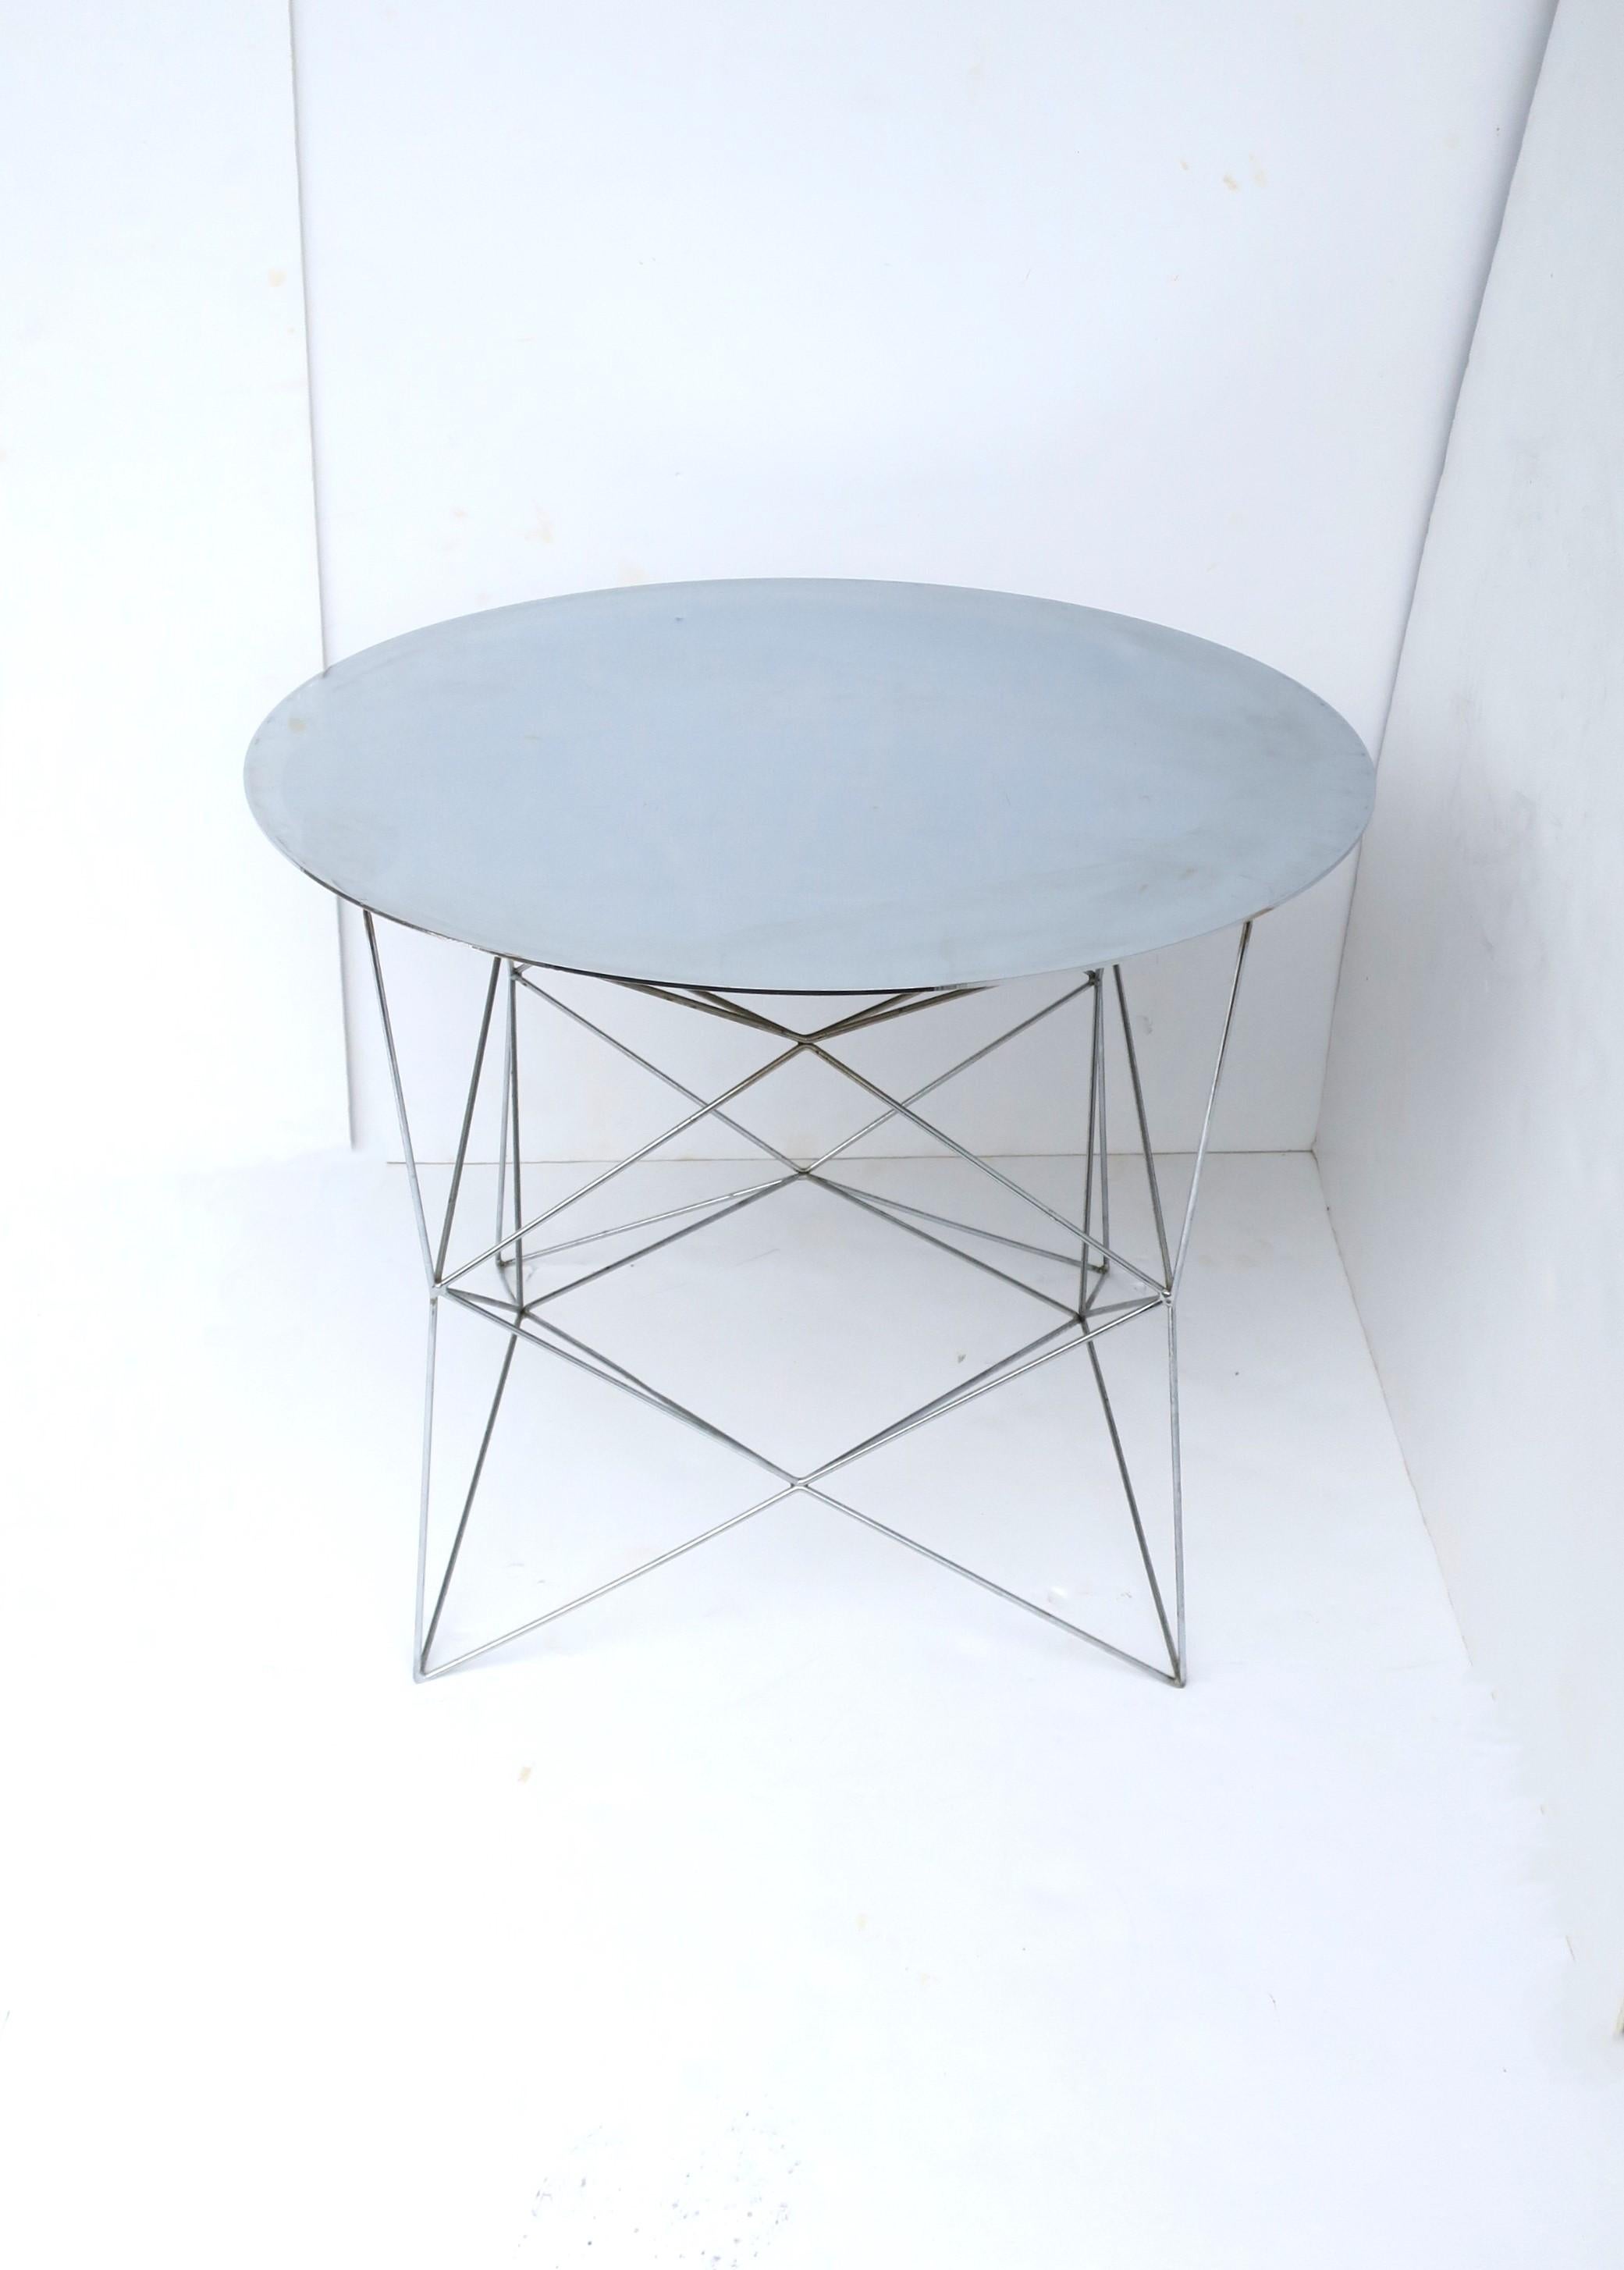 A nickel-plated chrome round side or end table with geometric chrome base, circa early 21st century. Tables' top is a beautiful, nickel-plated chrome with a geometric chrome base. A great piece for a living room, next to a sofa, chair, etc. Very